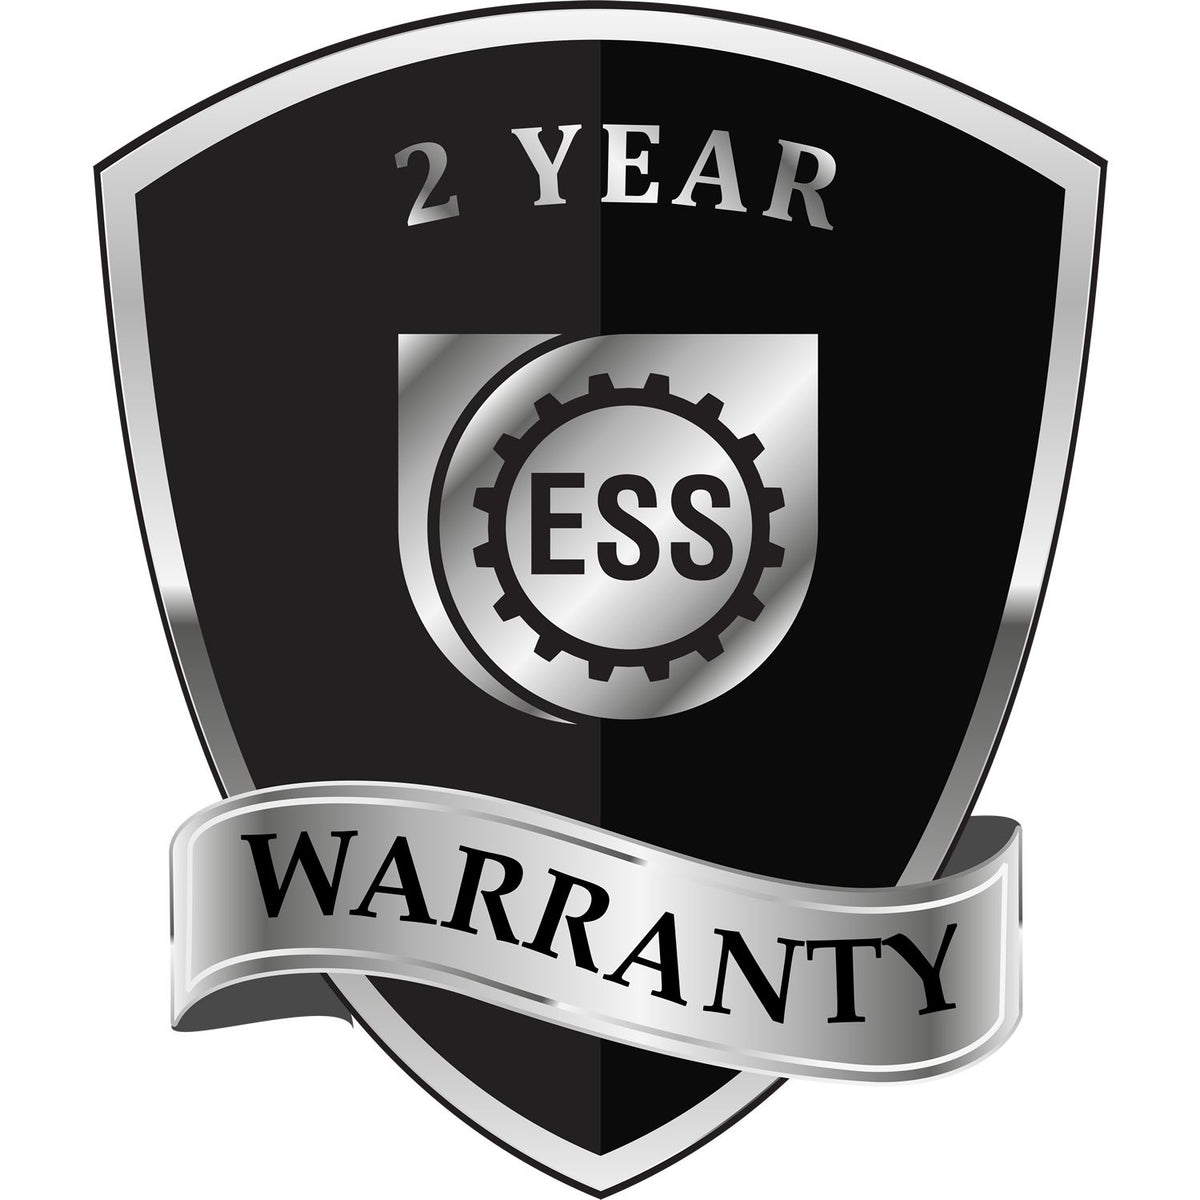 A badge or emblem showing a warranty icon for the Soft Pocket Tennessee Landscape Architect Embosser